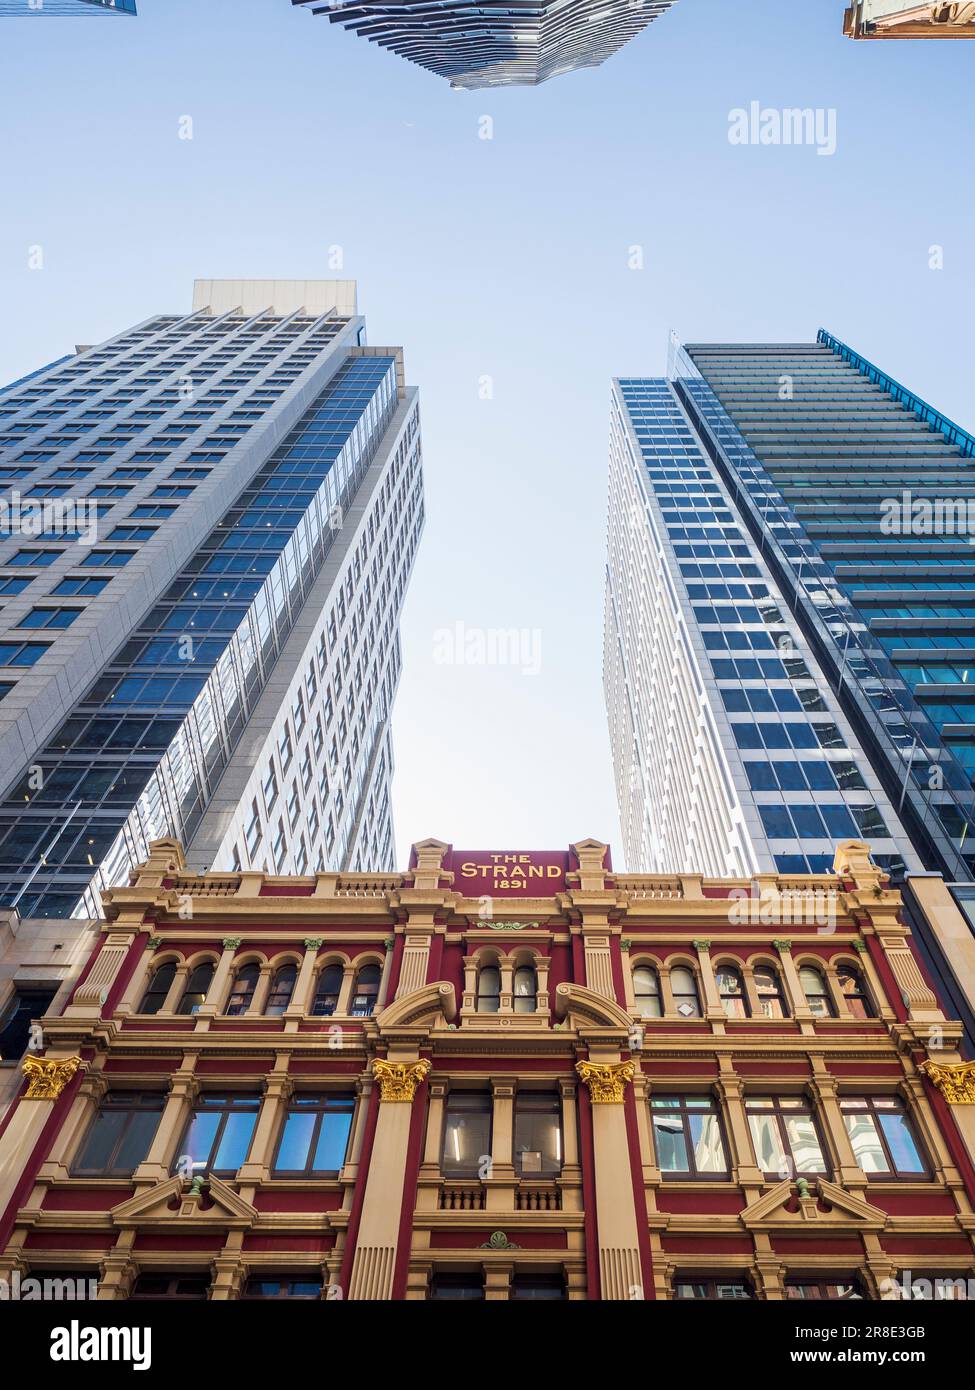 Australia, New South Wales, Sydney, Low angle view of hotel between skyscrapers Stock Photo